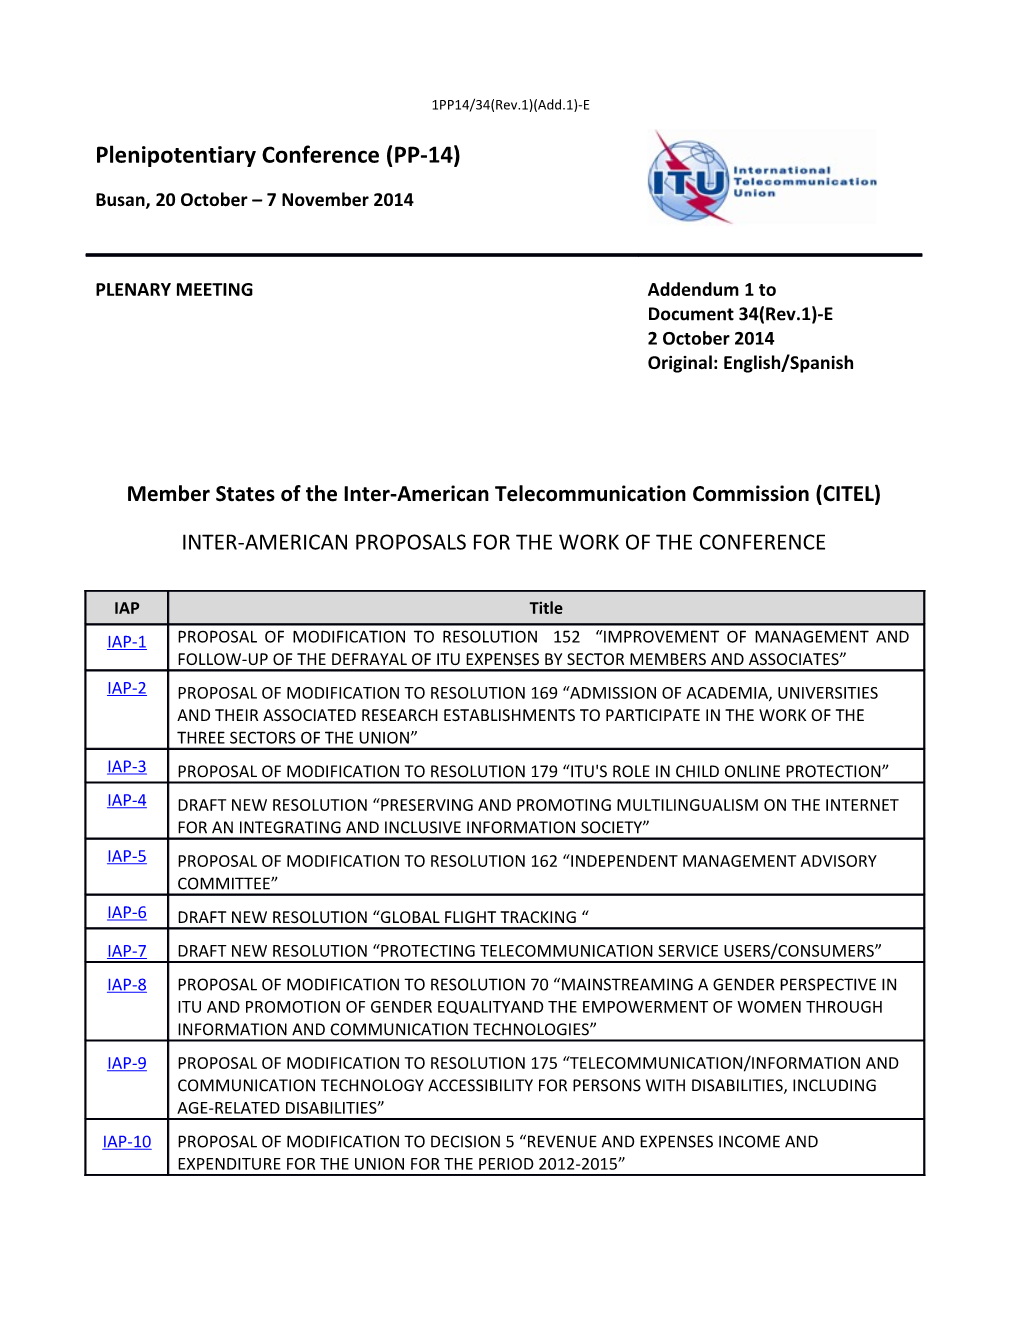 Iap-1:Proposal of Modification to Resolution 152 Improvement of Management and Follow-Up